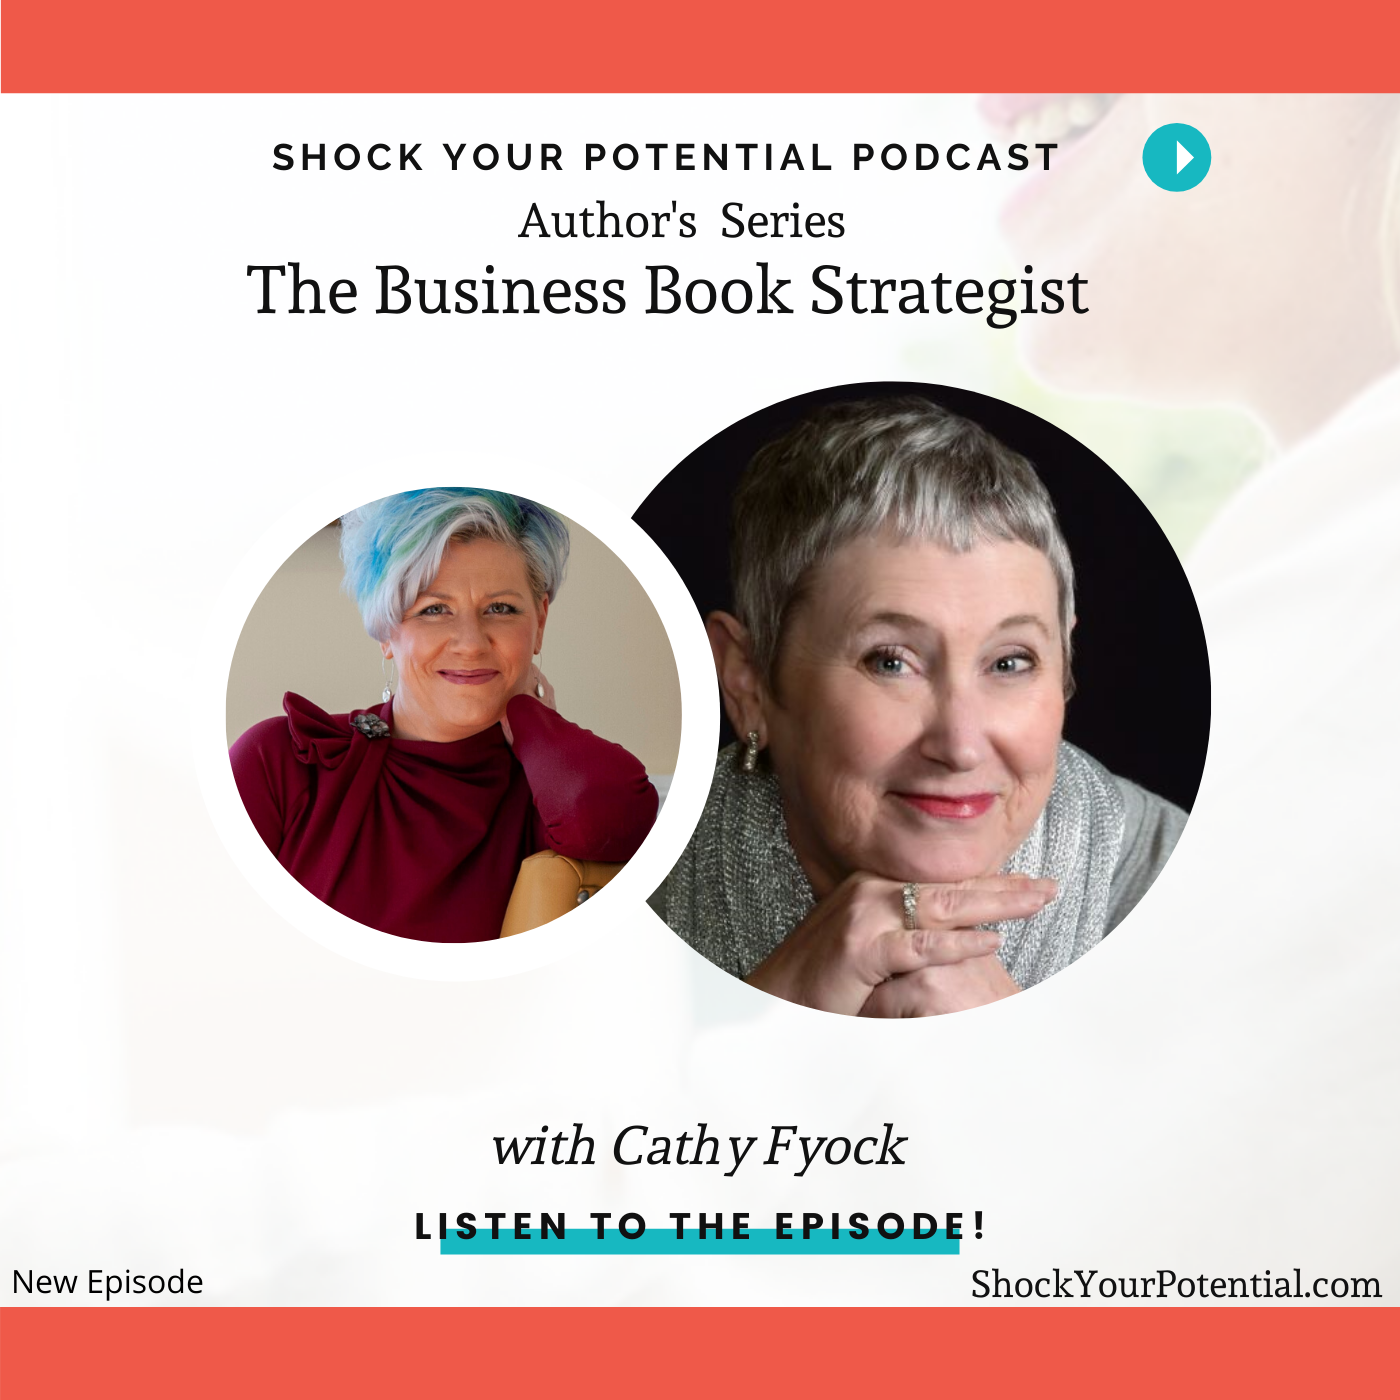 The Business Book Strategist – Cathy Fyock